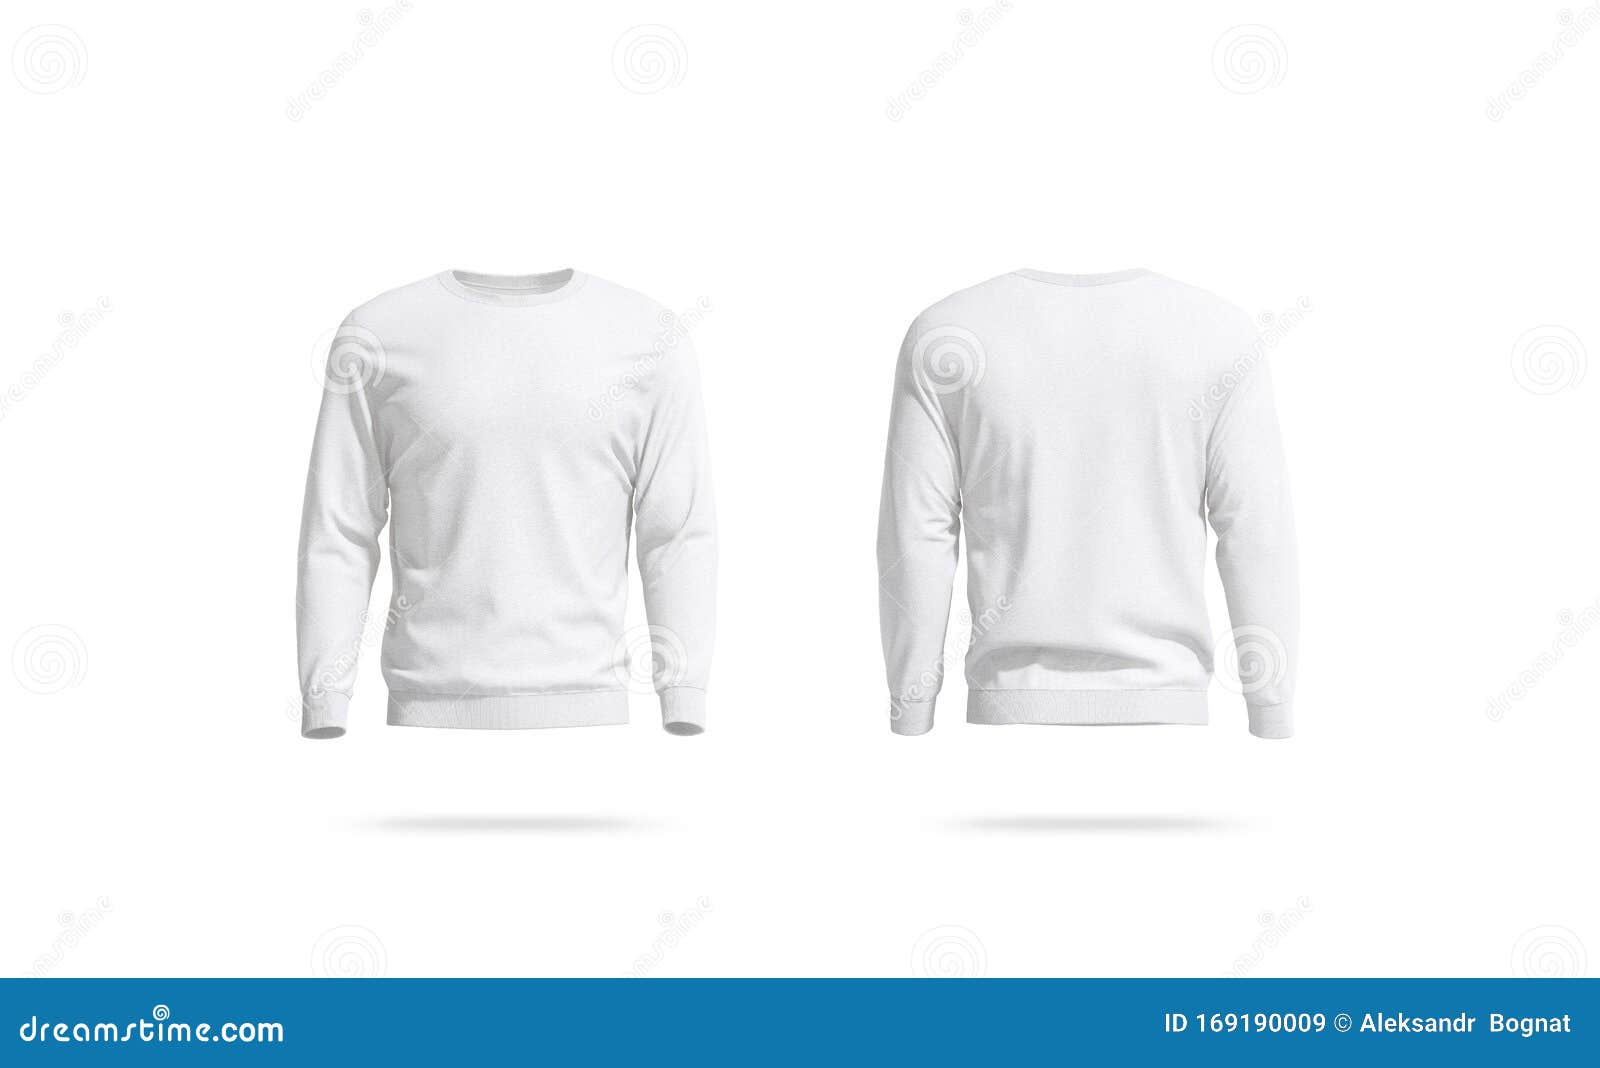 Download Blank White Unisex Sweatshirt Mockup, Front And Back View ...